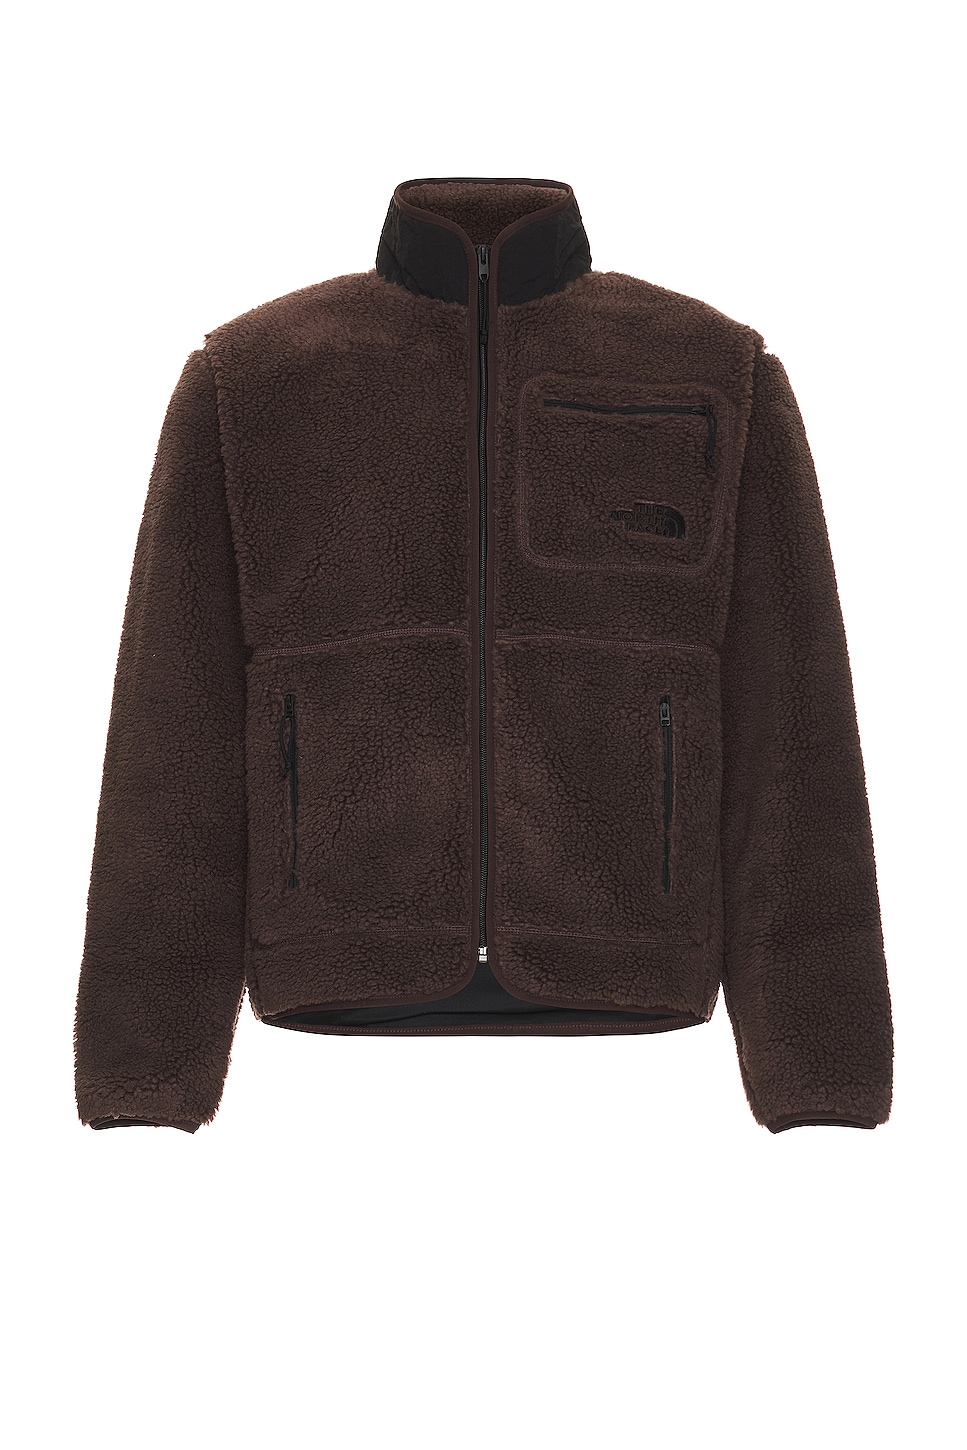 Image 1 of The North Face Extreme Pile Full Zip Jacket in Coal Brown